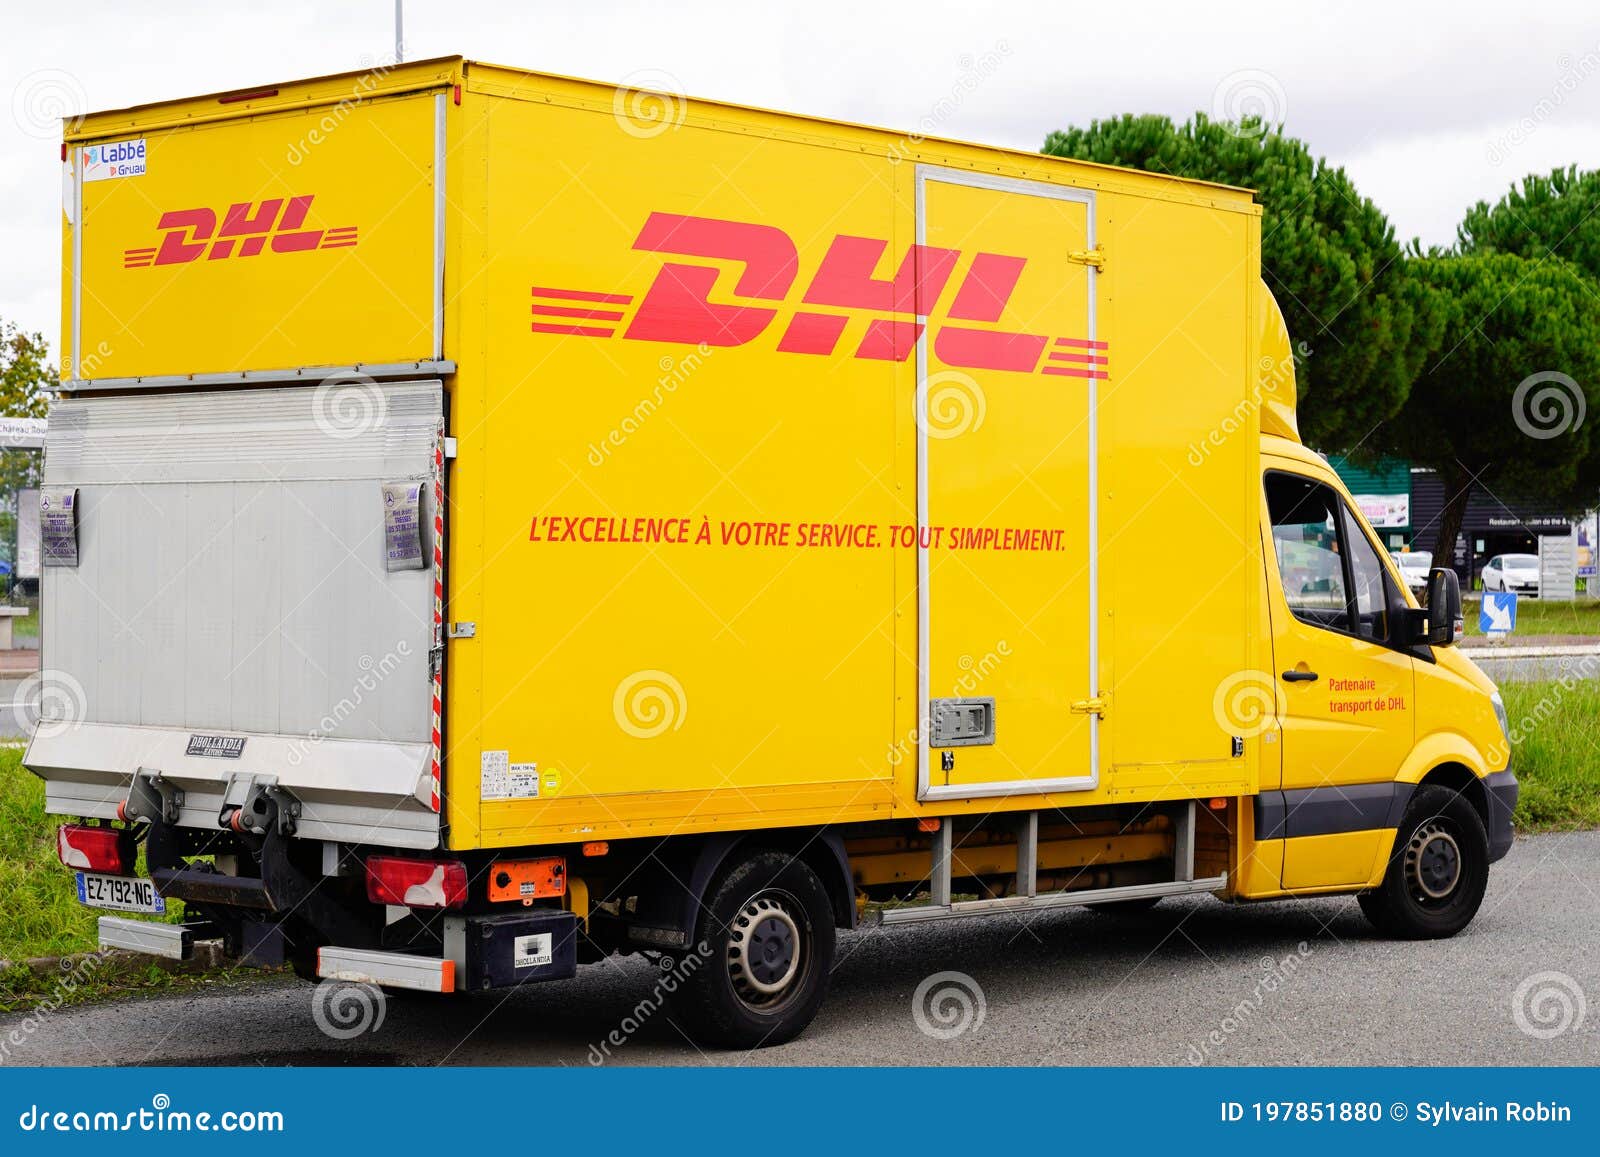 dhl courier